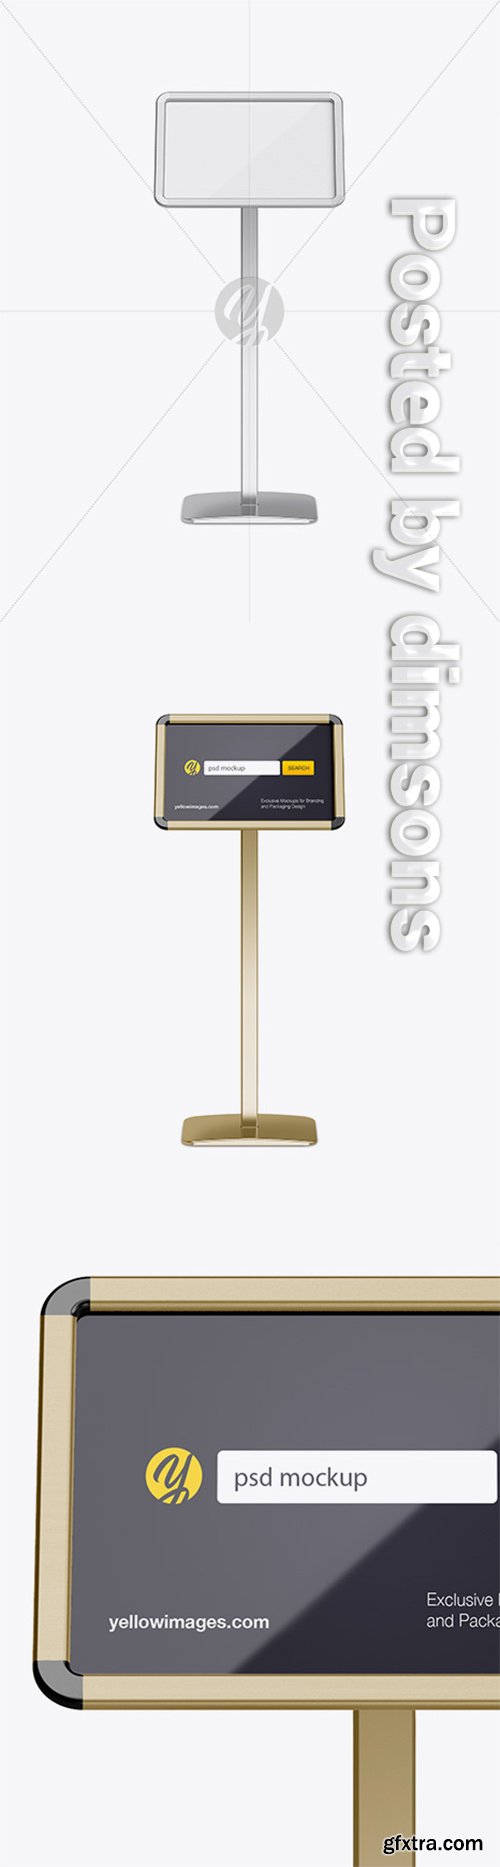 Metallic Frame Poster Stand Mockup - Front View 21149